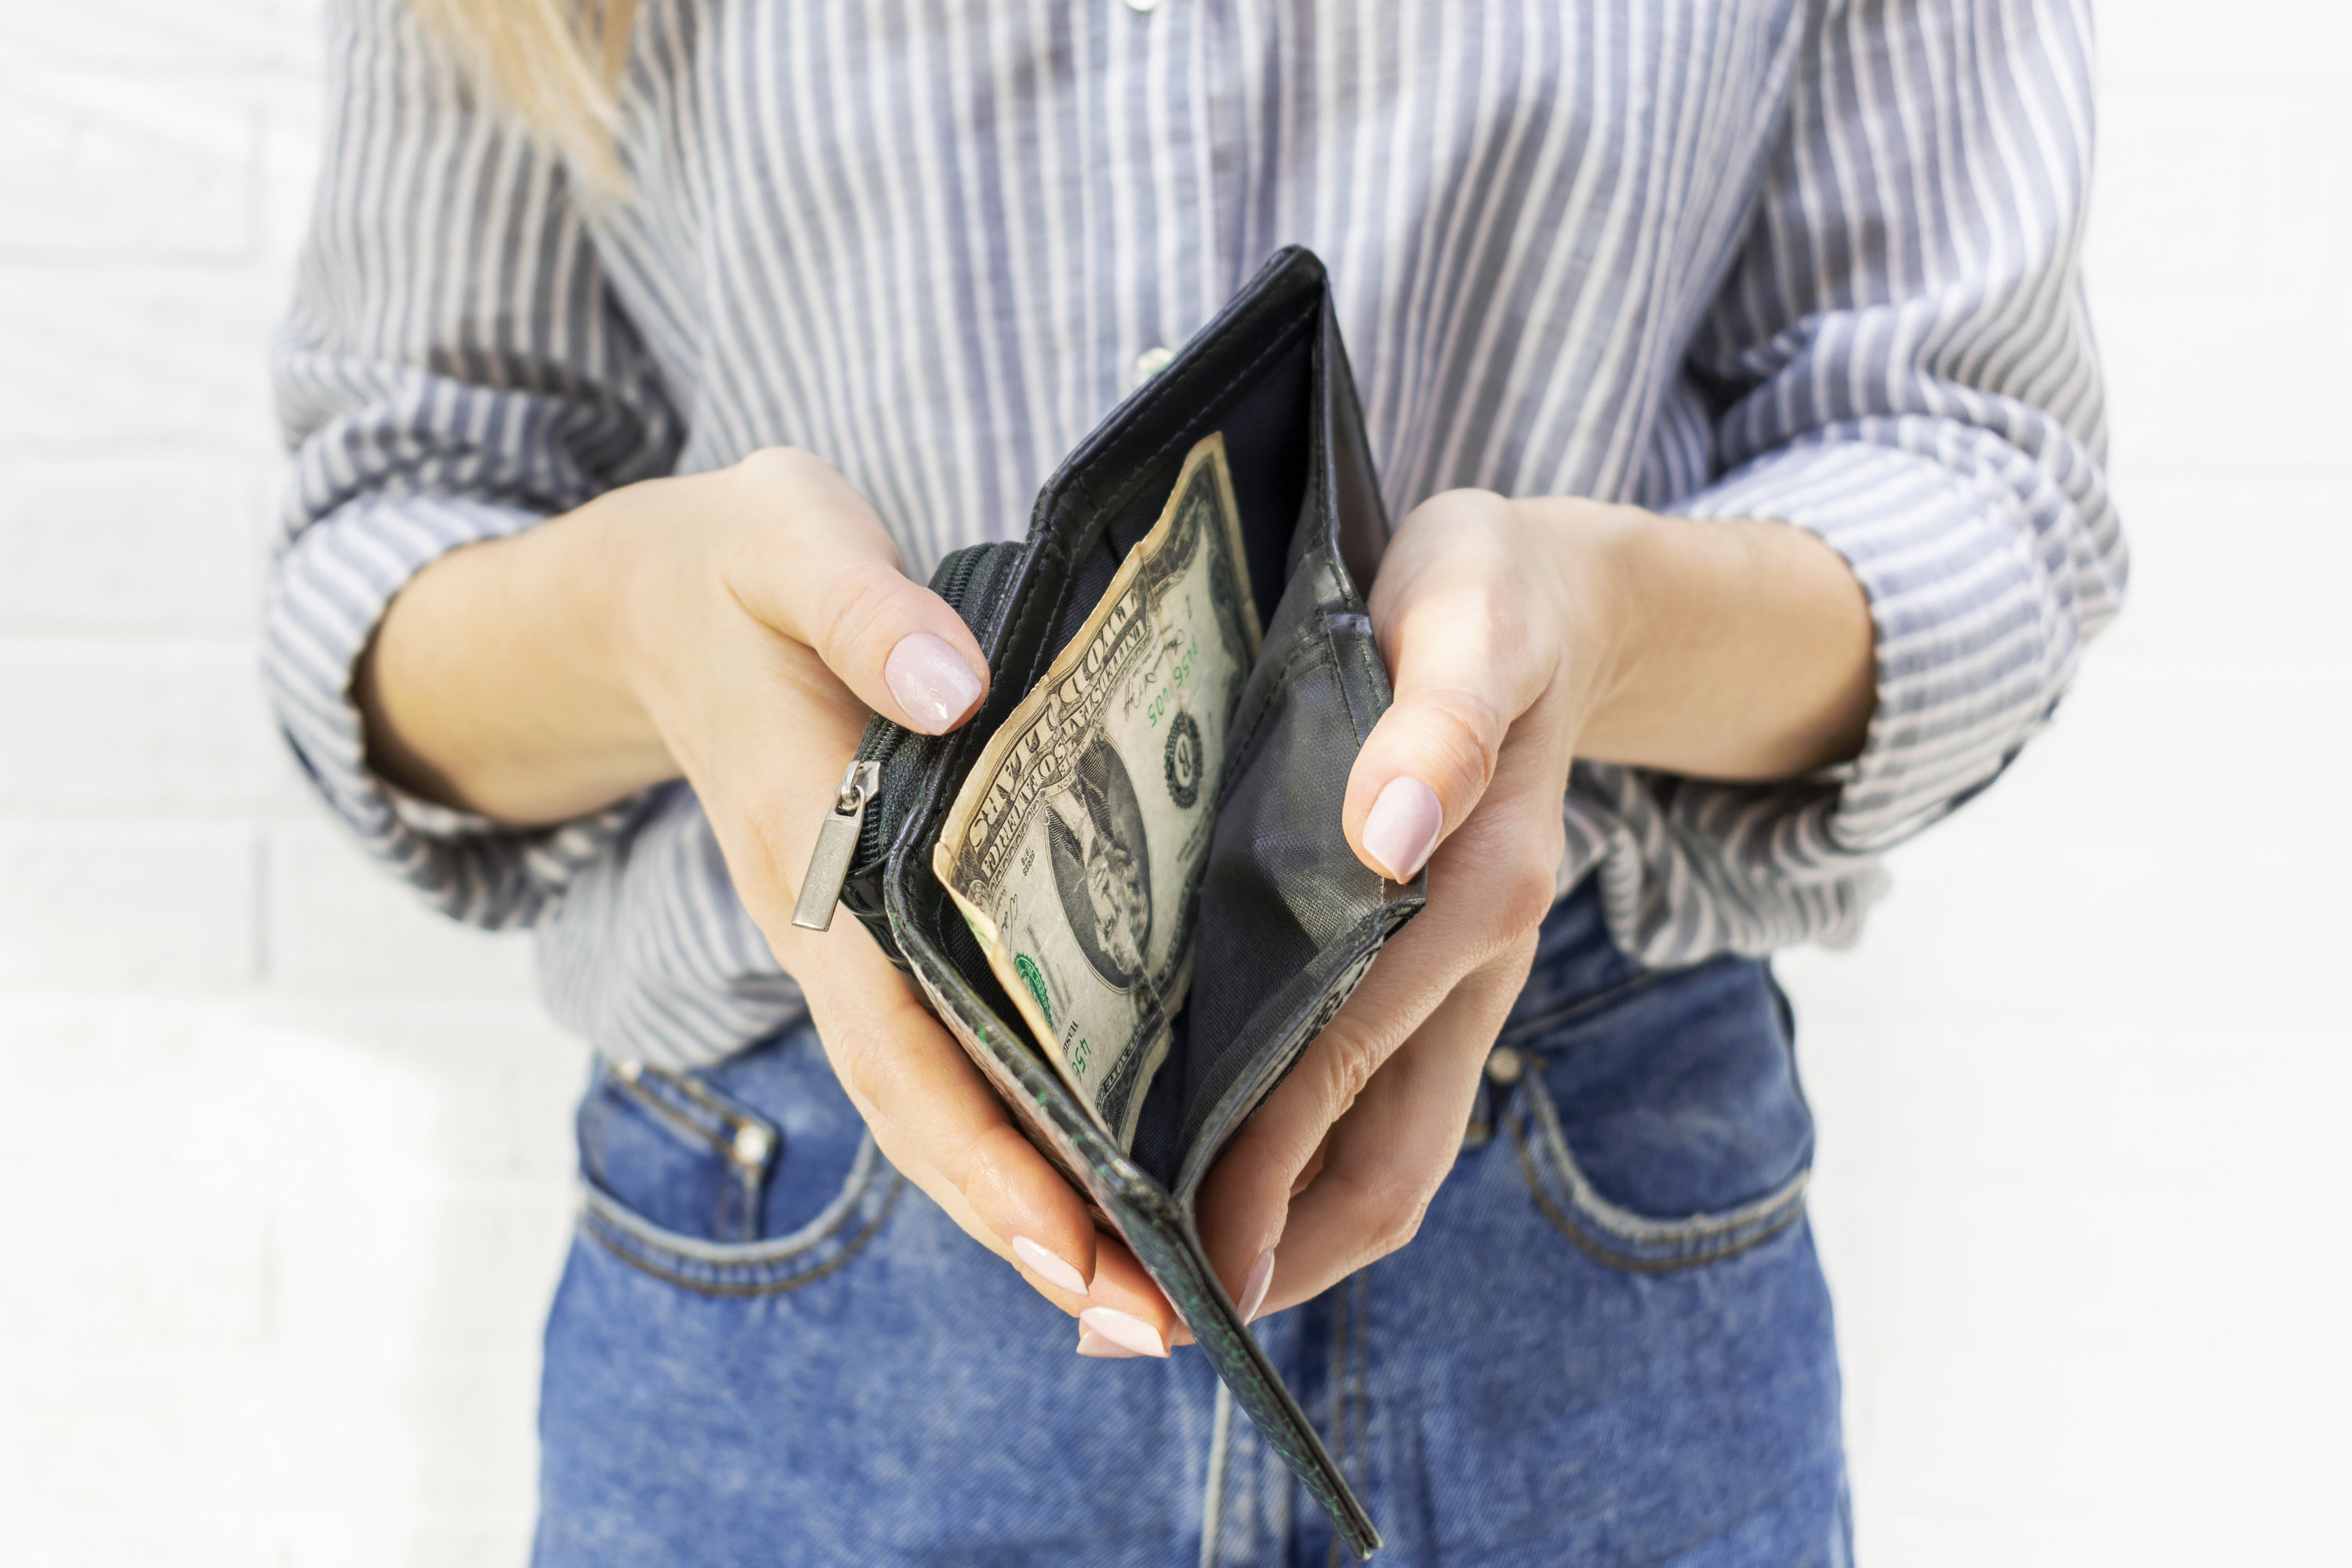 The hands of a young woman hold an open wallet with the last banknote